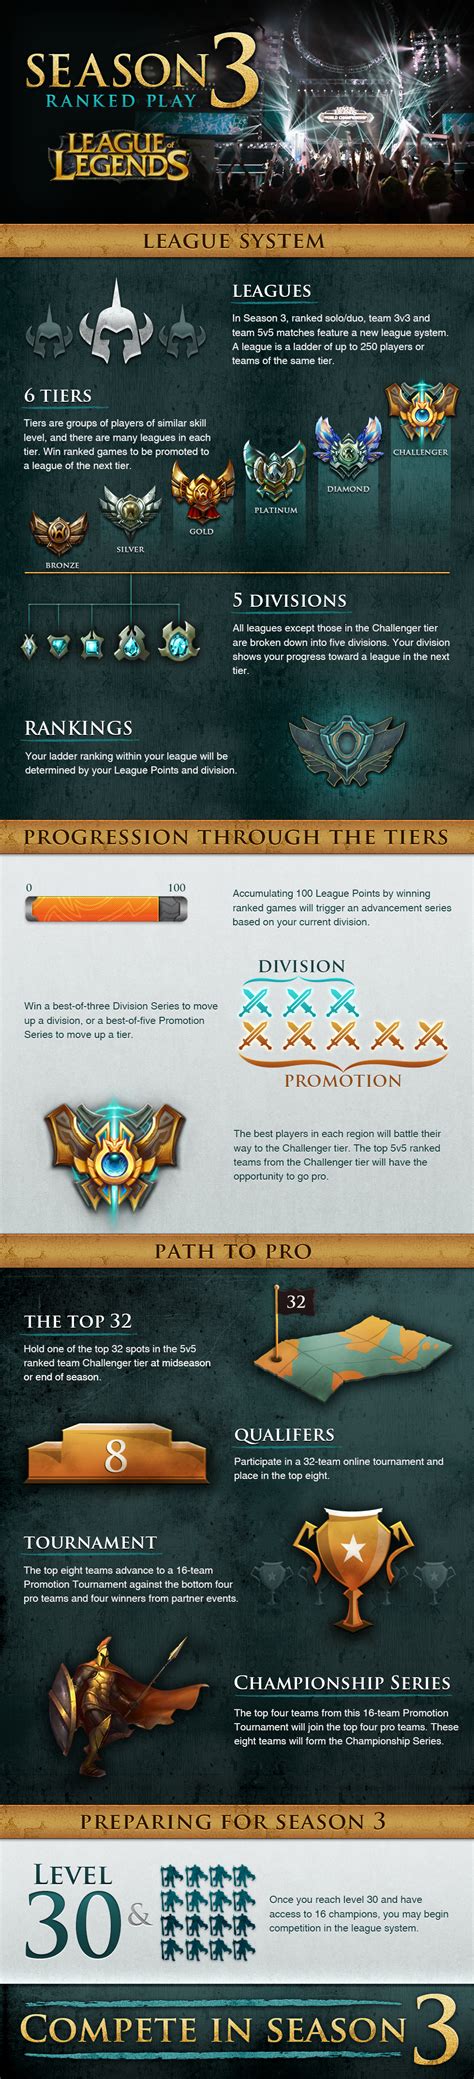 League Of Legends Season 3 Ranked Play Infographic